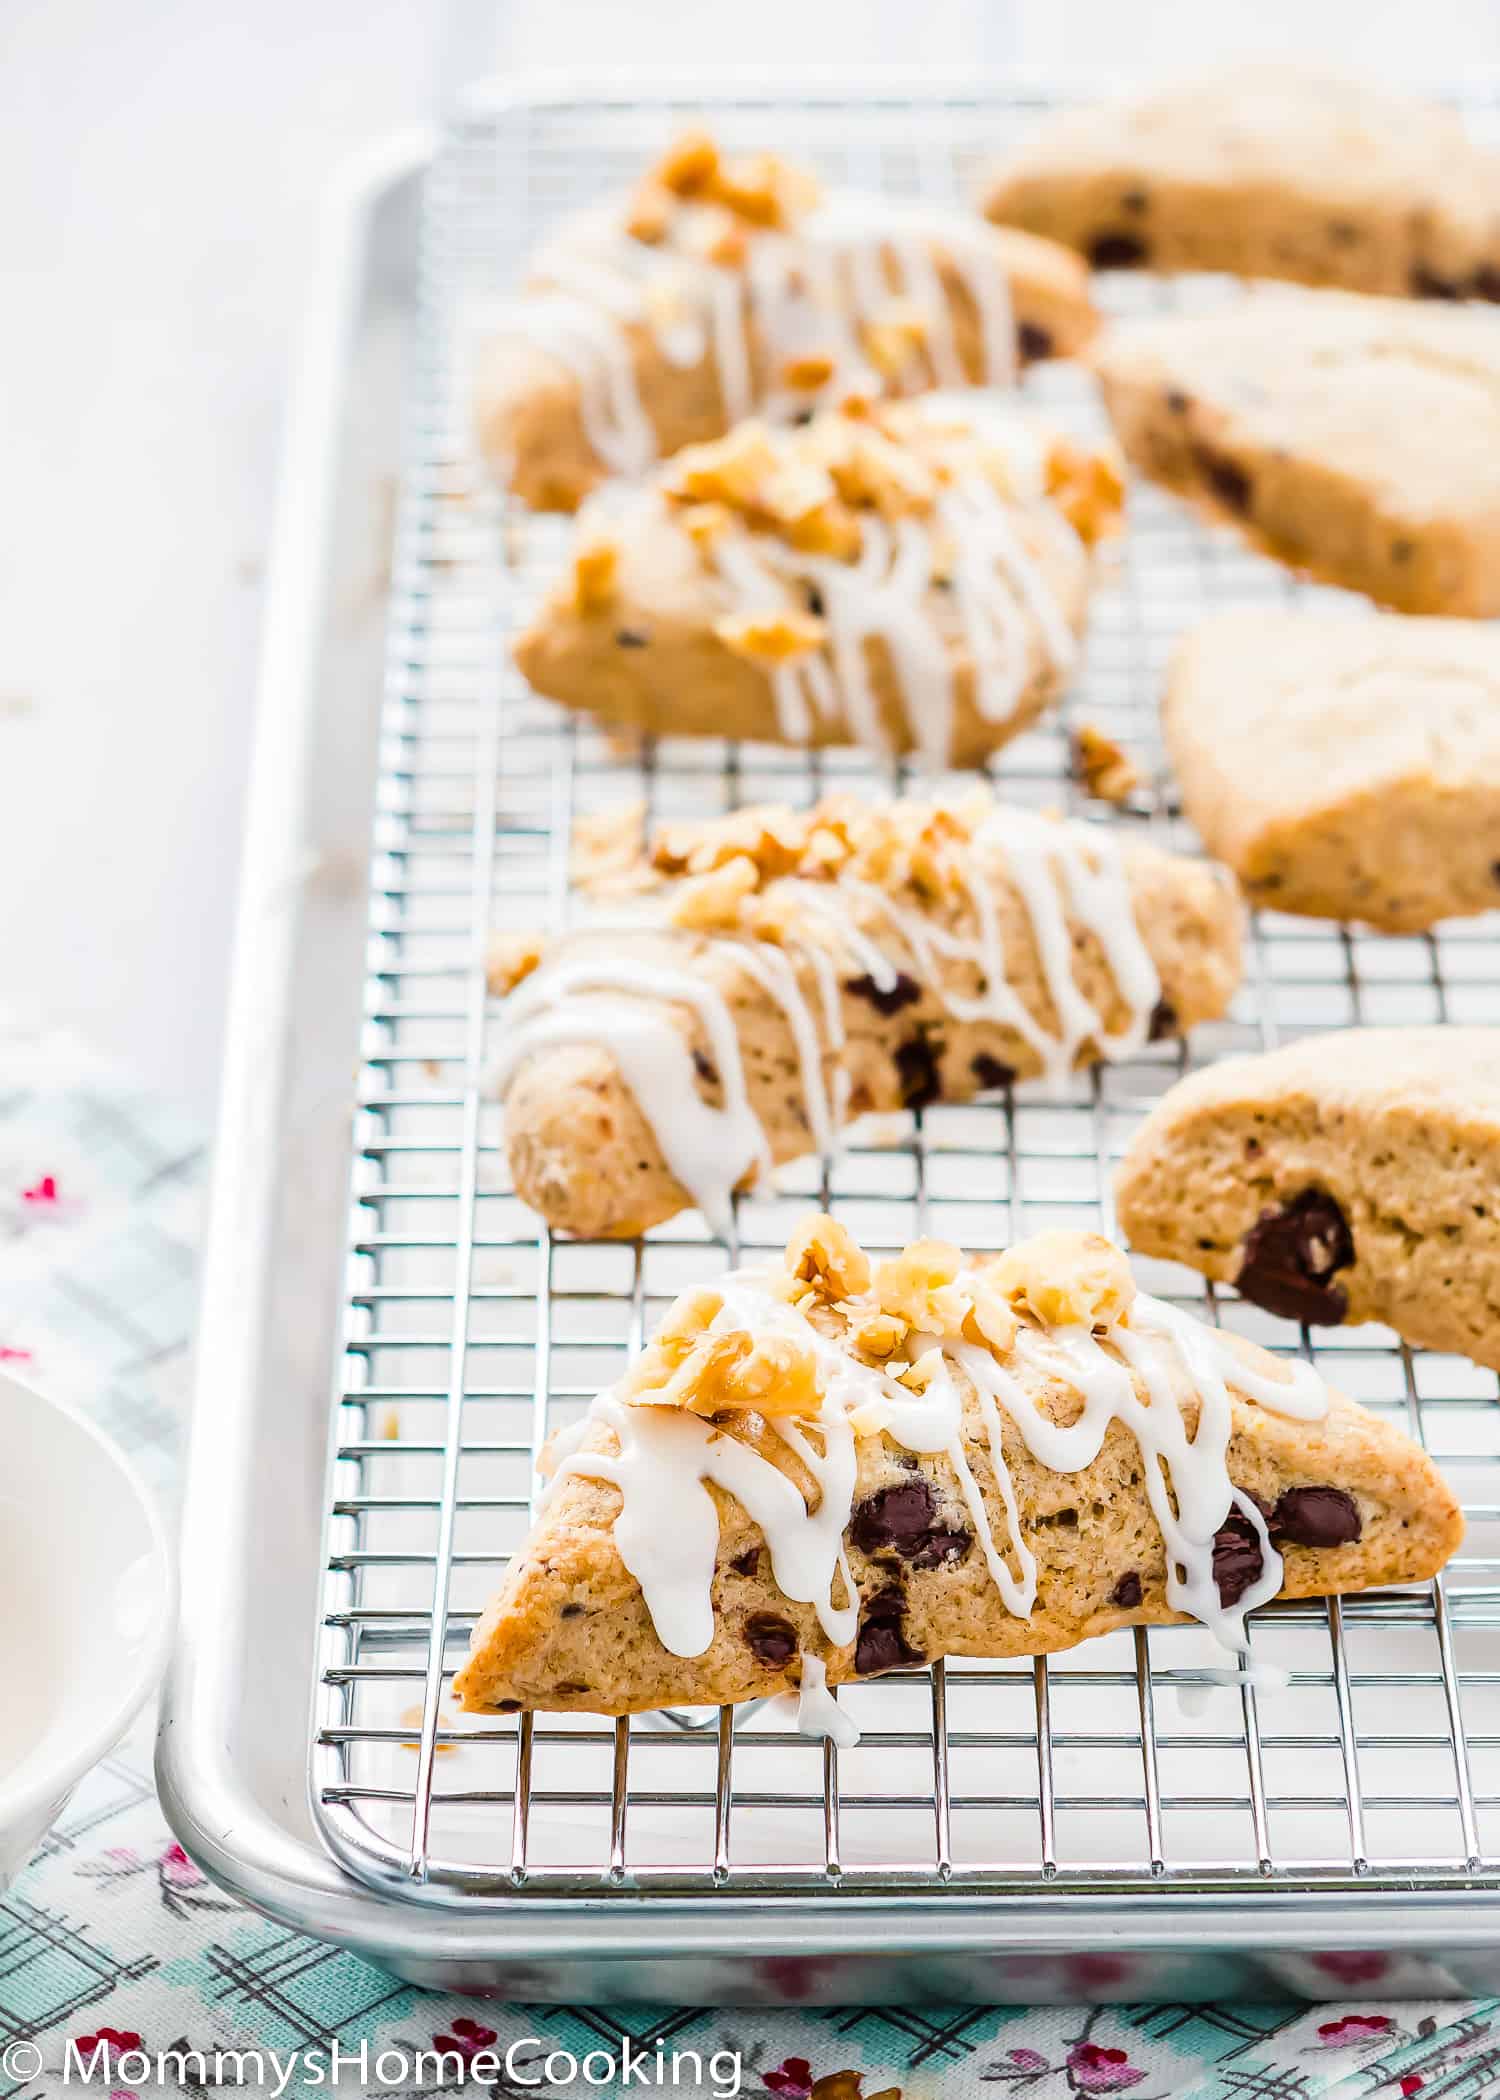 Eggless Chocolate Chip Scones with glaze and chopped nuts over a cooling rack.